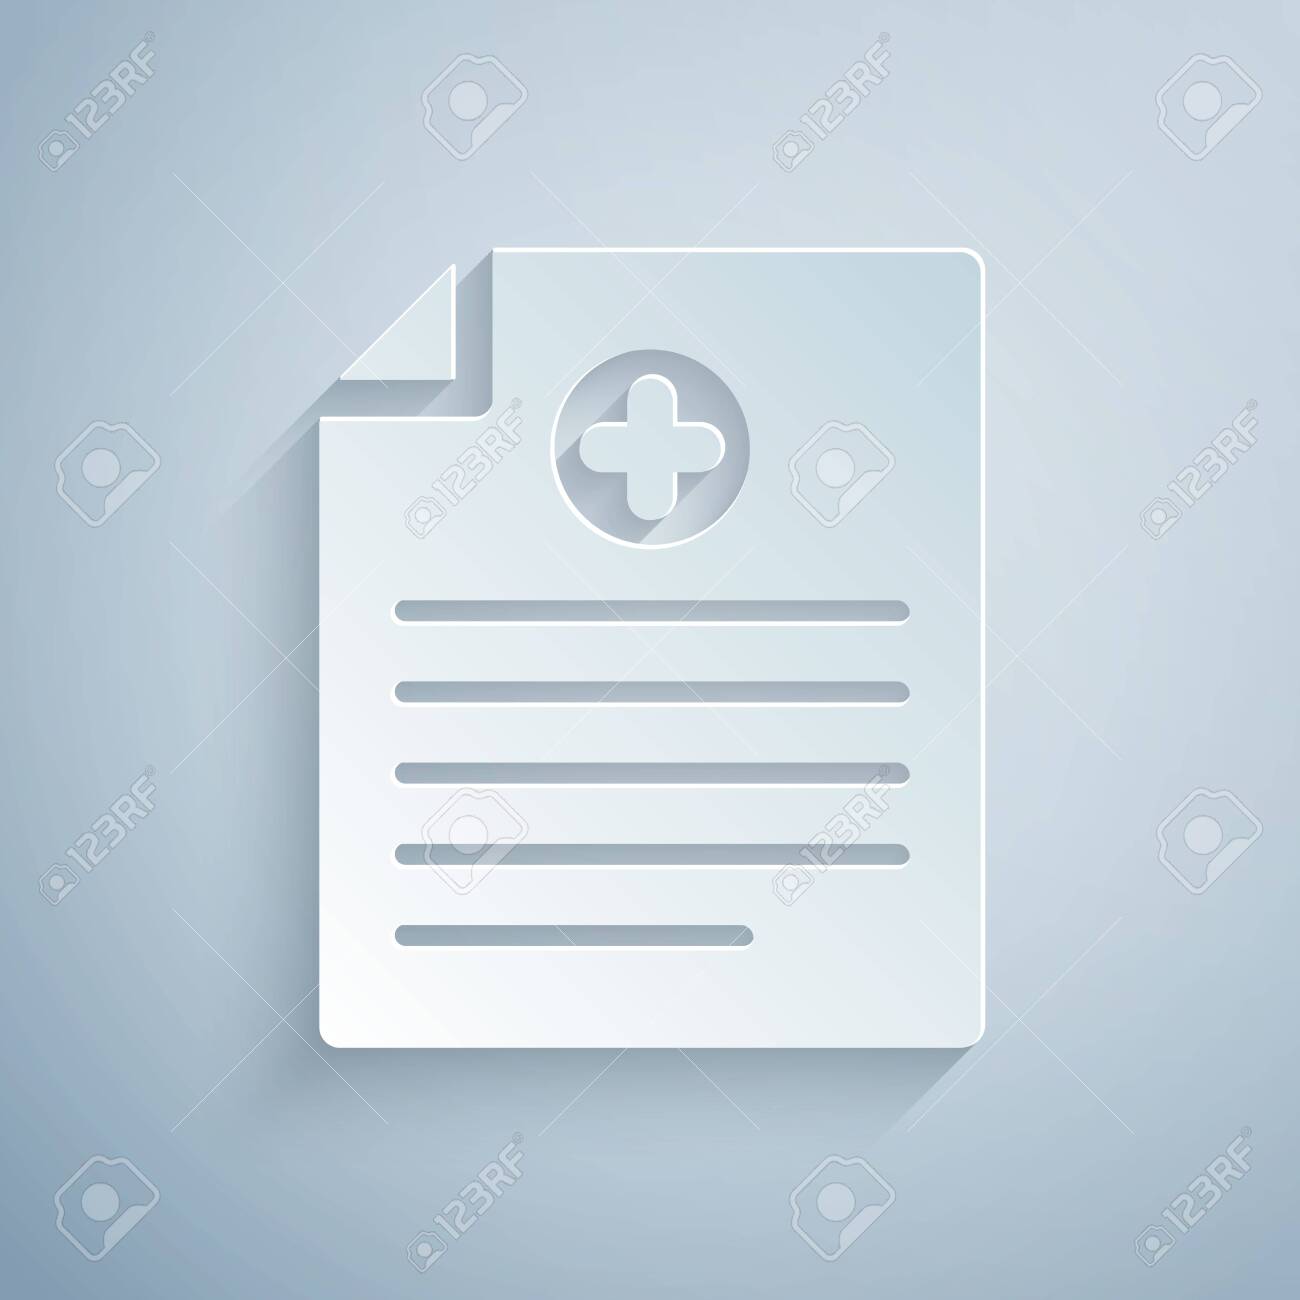 Paper Cut Medical Clipboard With Clinical Record Icon Isolated